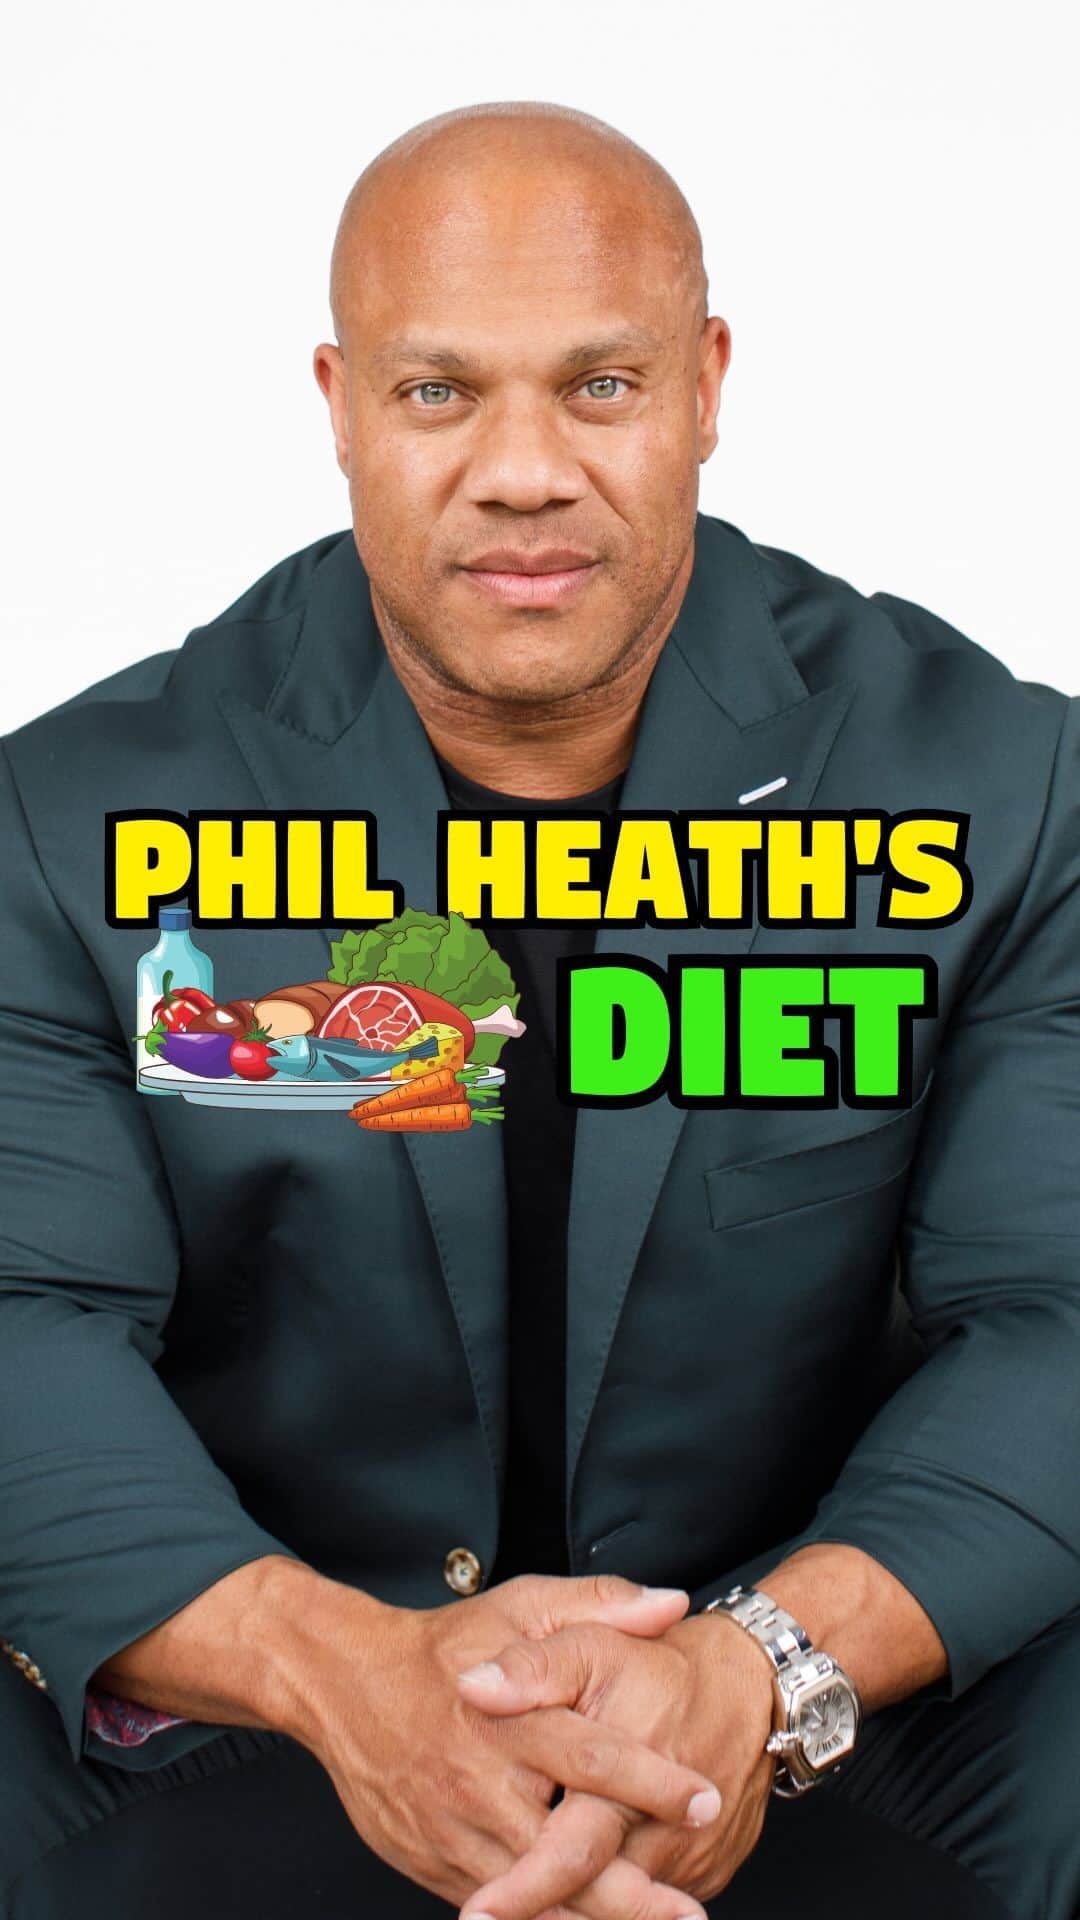 Phil Heathのインスタグラム：「What does 7x Mr. Olympia eat now?   🔗 Click The Link In our Bio  🗓️ Fill Out a Patient Intake Form⁣⁣ We’ll Help Find the Right Treatment Options!⁣  🇺🇸 Veteran Owned & Operated⁣  Disclaimer: Any content posted on this Instagram account is for entertainment, educational and knowledge purposes only and is not intended as medical advice. We always recommend consulting with our team of licensed healthcare providers before making any changes to your wellness or medical routine. Our content is intended to promote wellness and healthy approaches to lifestyle choices. By viewing and engaging with our Instagram content, you agree to this disclaimer.  #fitnessjourney #fitnesslifestyle #fitnessgoals #fitnessinspiration #fitnessaddicted #fitnesstips #fitnessgoal #transcend #wellnessfriday #wellnessjourney #fridaymotivation #wellnessfitness #wellnesslife #hrt #hormonereplacementtherapy #hormonetherapy #philheath #mrolympia  #fitnesscommunity #peptidetherapy #transcendhrt #transcendcompany #weightloss #weightlosstransformation #weightlossgoals」